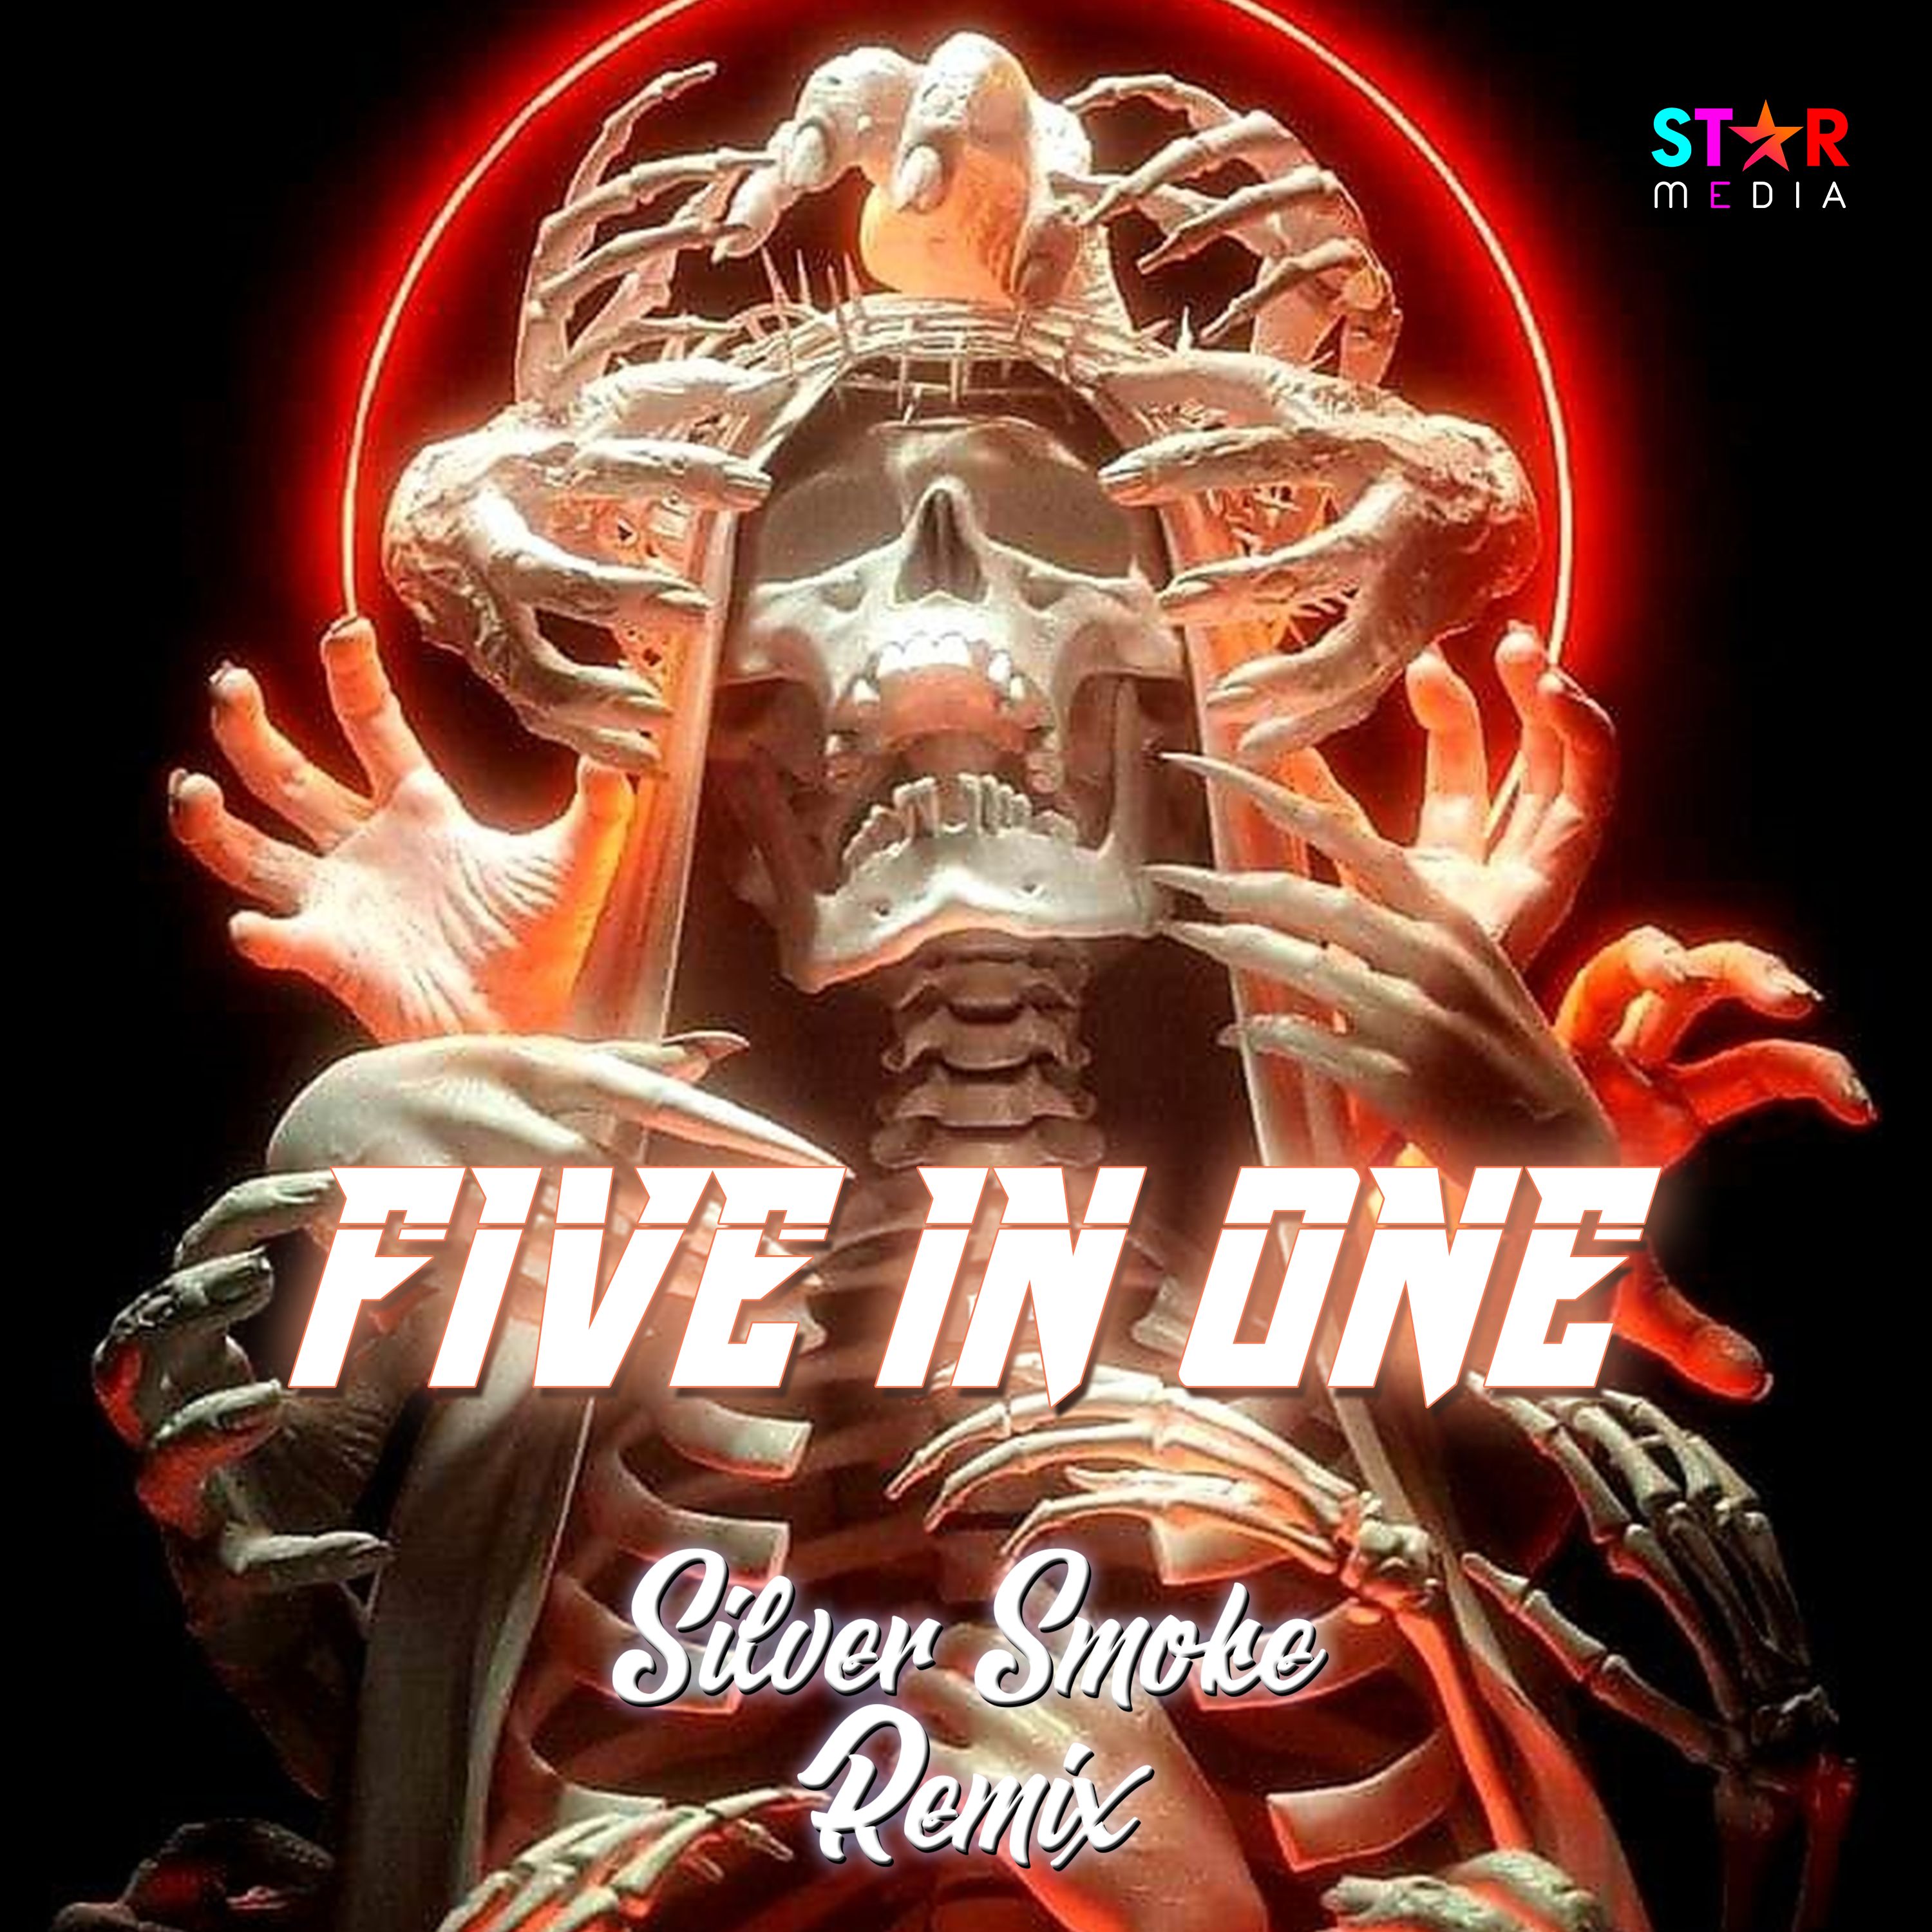 Prenesi 5 IN 1 - SILVER SMOKE REMIX (Out Out,The Magic Key,Butterfly,Party Started,Bóng Tối Trước Bình Minh)